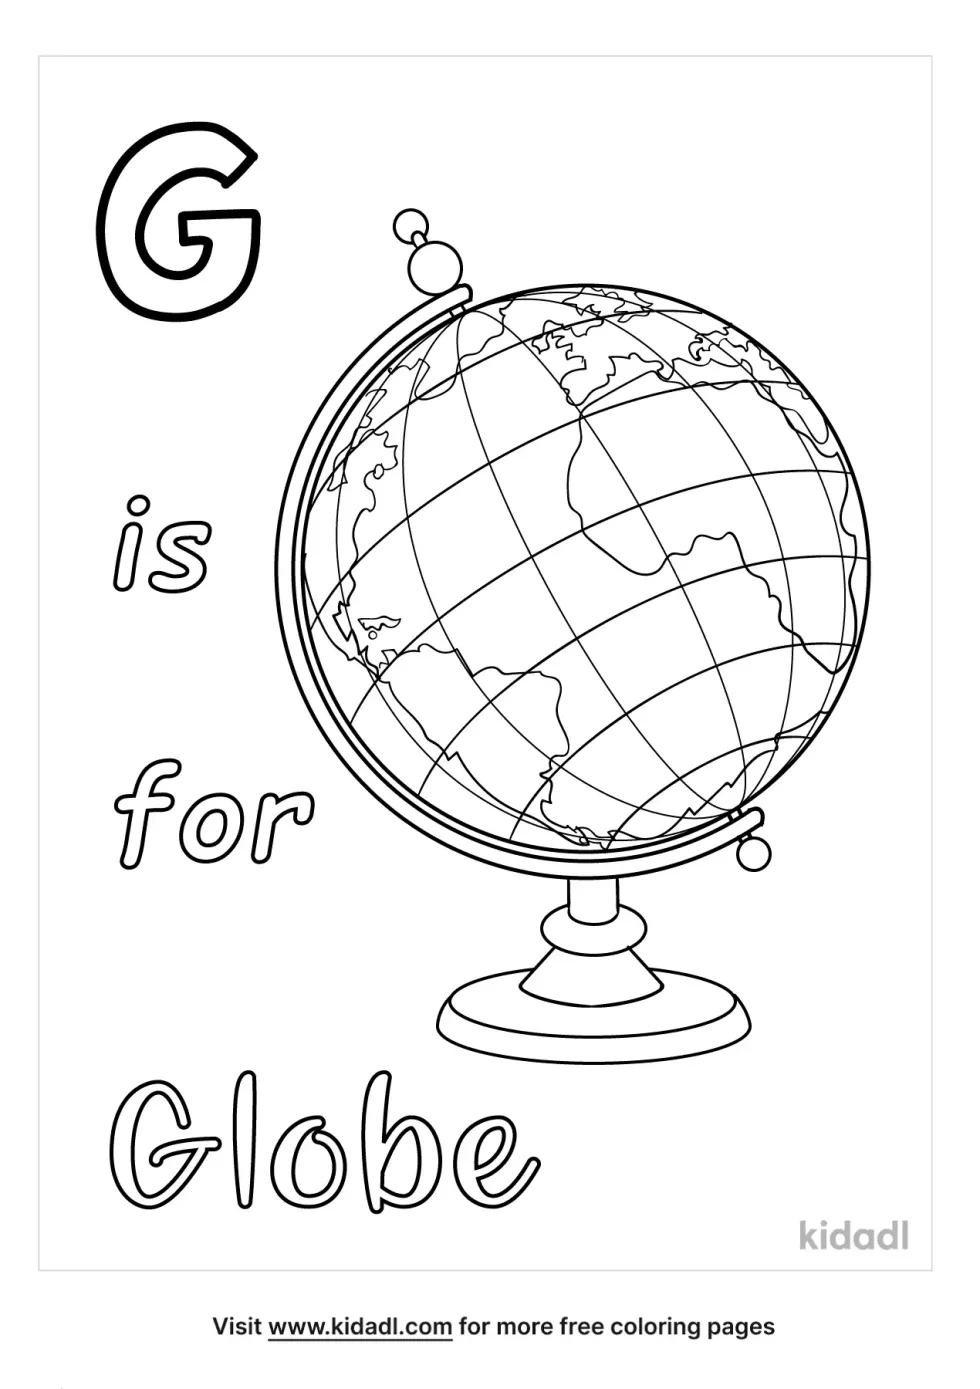 G Is For Globe Coloring Page